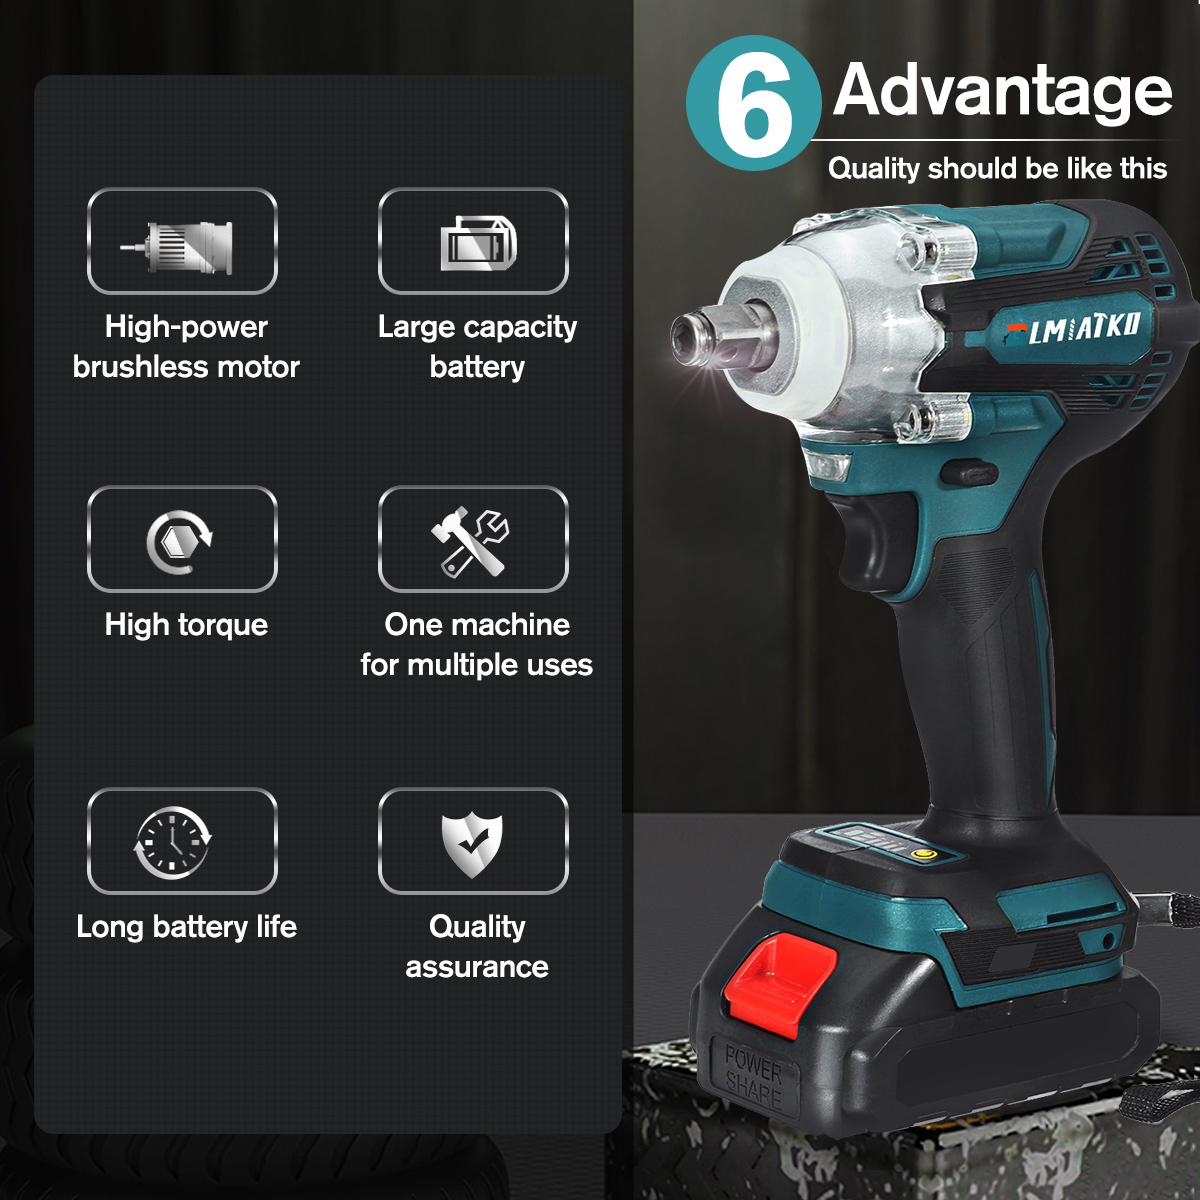 4-Speed-Brushless-Cordless-Electric-Impact-Wrench-with-Battery-1200NM-Rechargeable-12inch-Torque-Wre-1843508-6